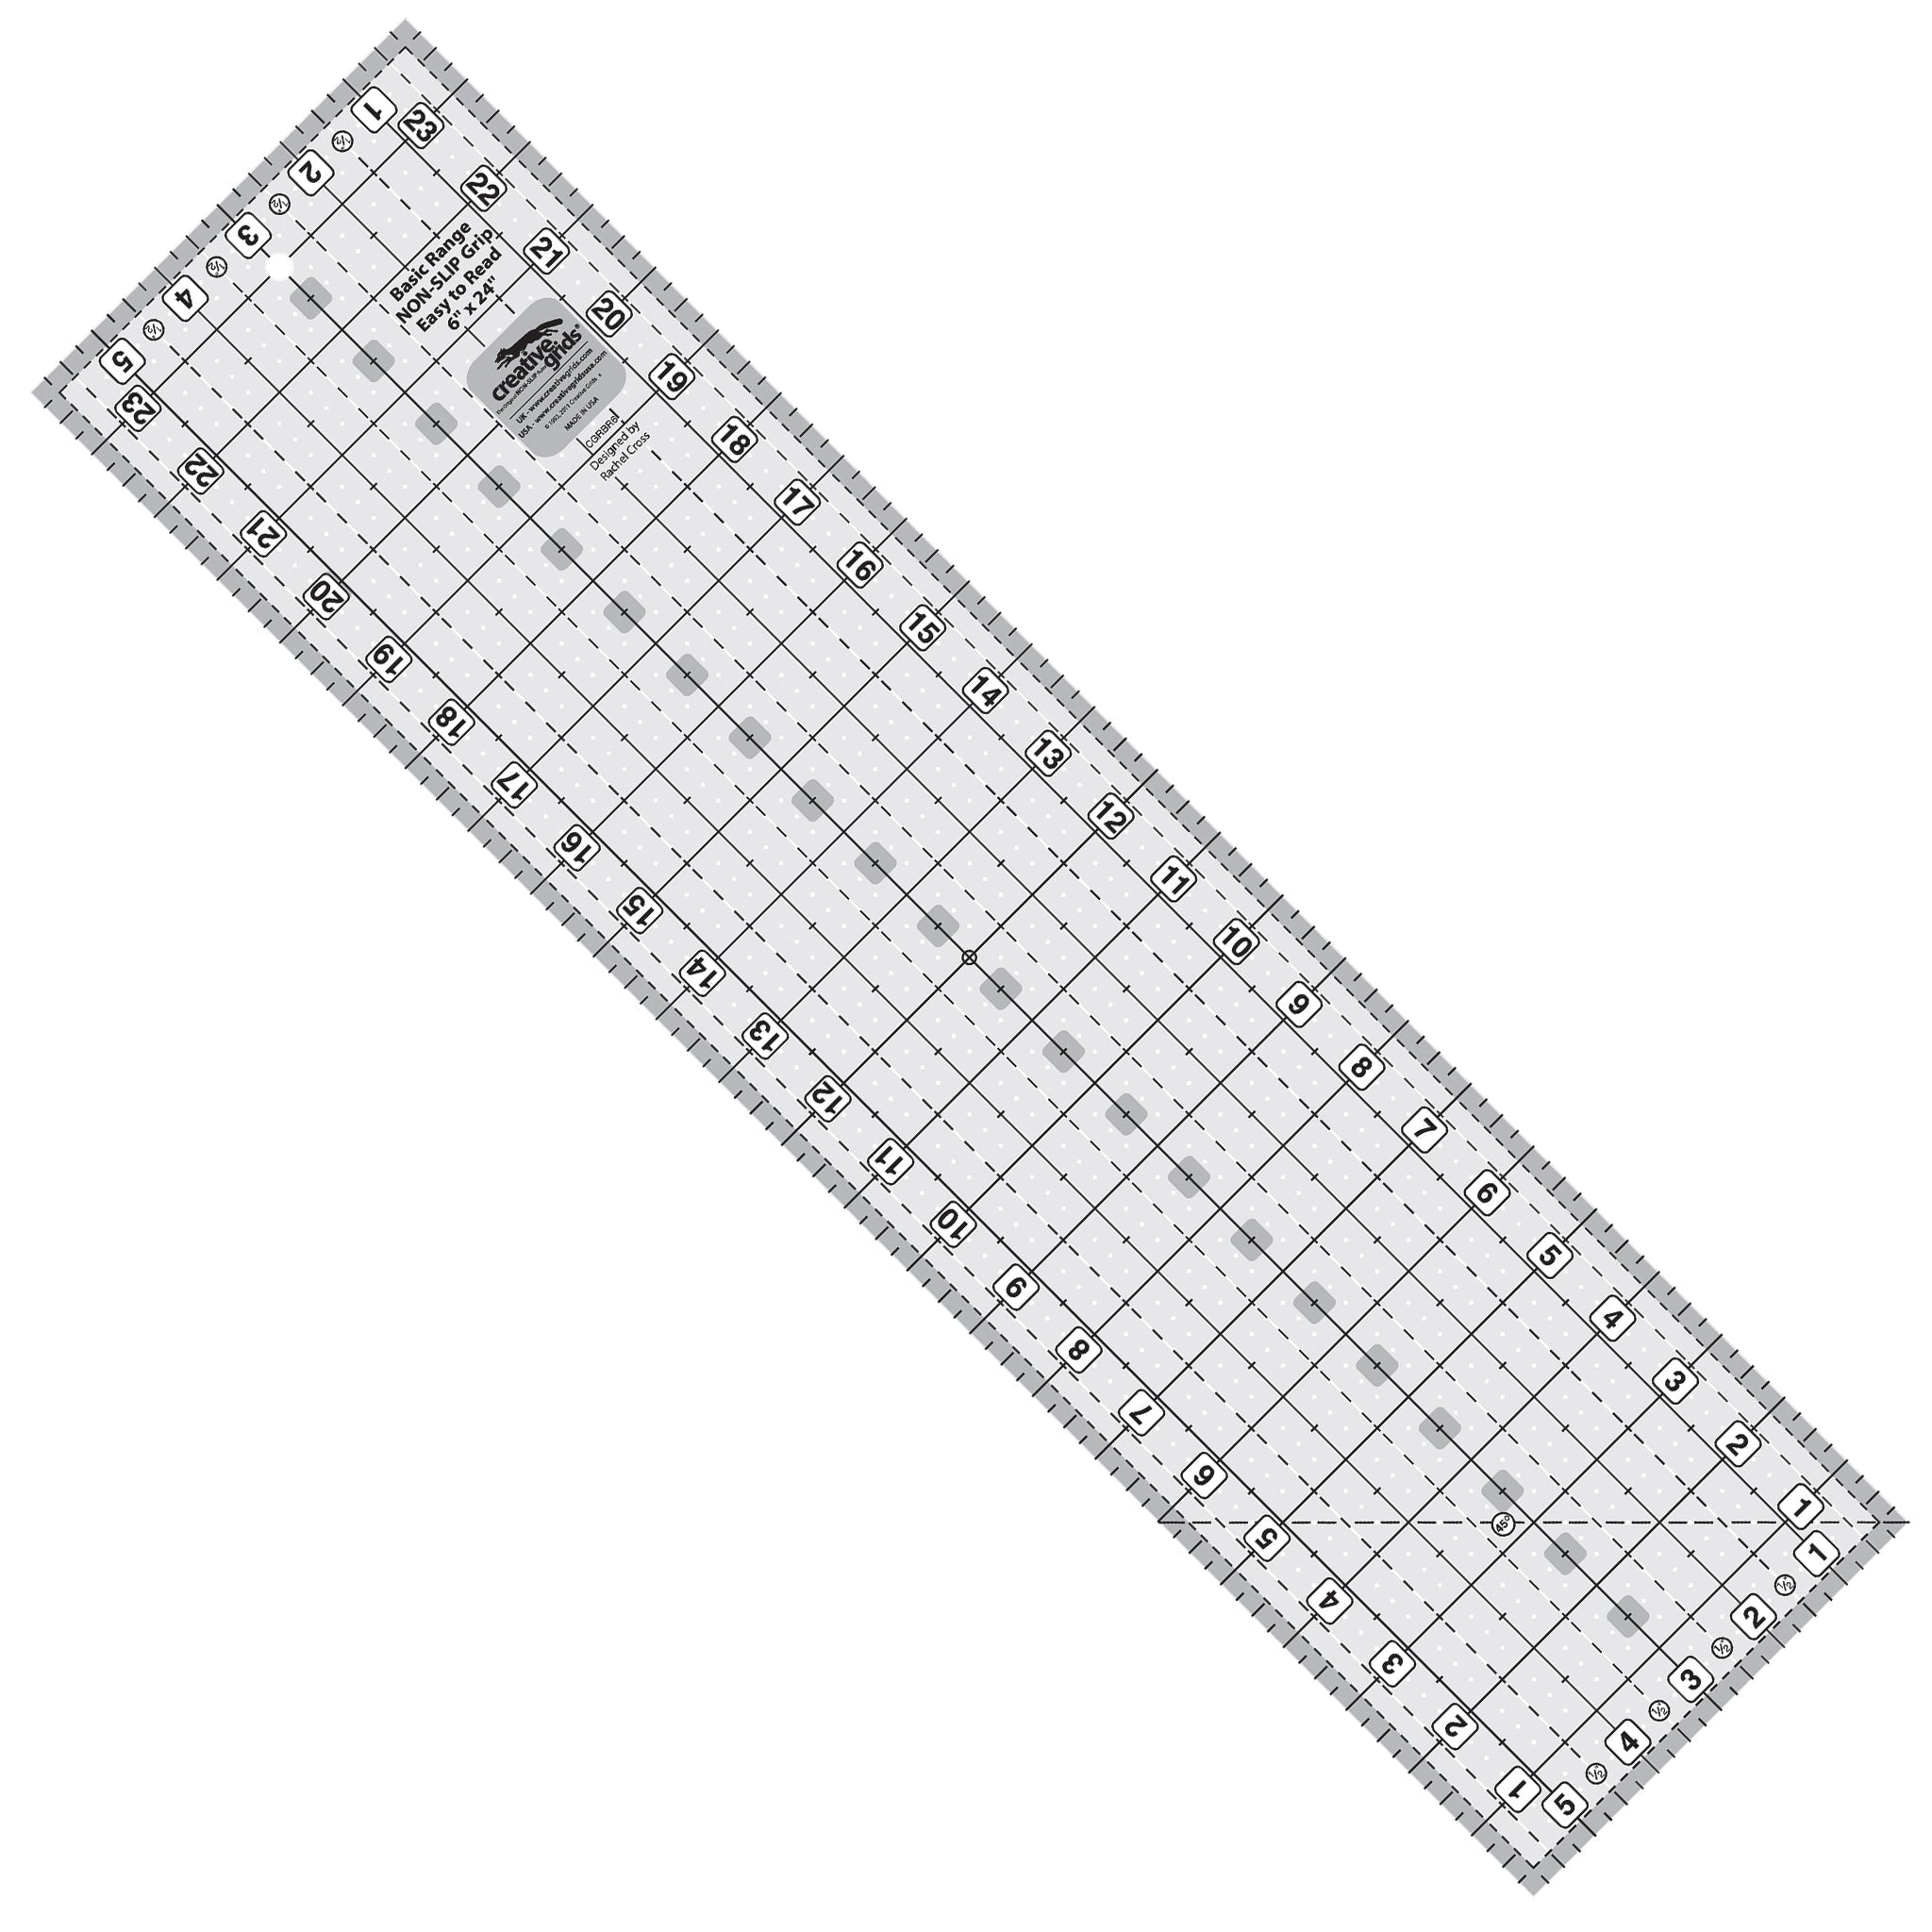 Creative Grids Basic Range 6-Inch X 24-Inch Rectangle Quilt Ruler (CGRBR6)